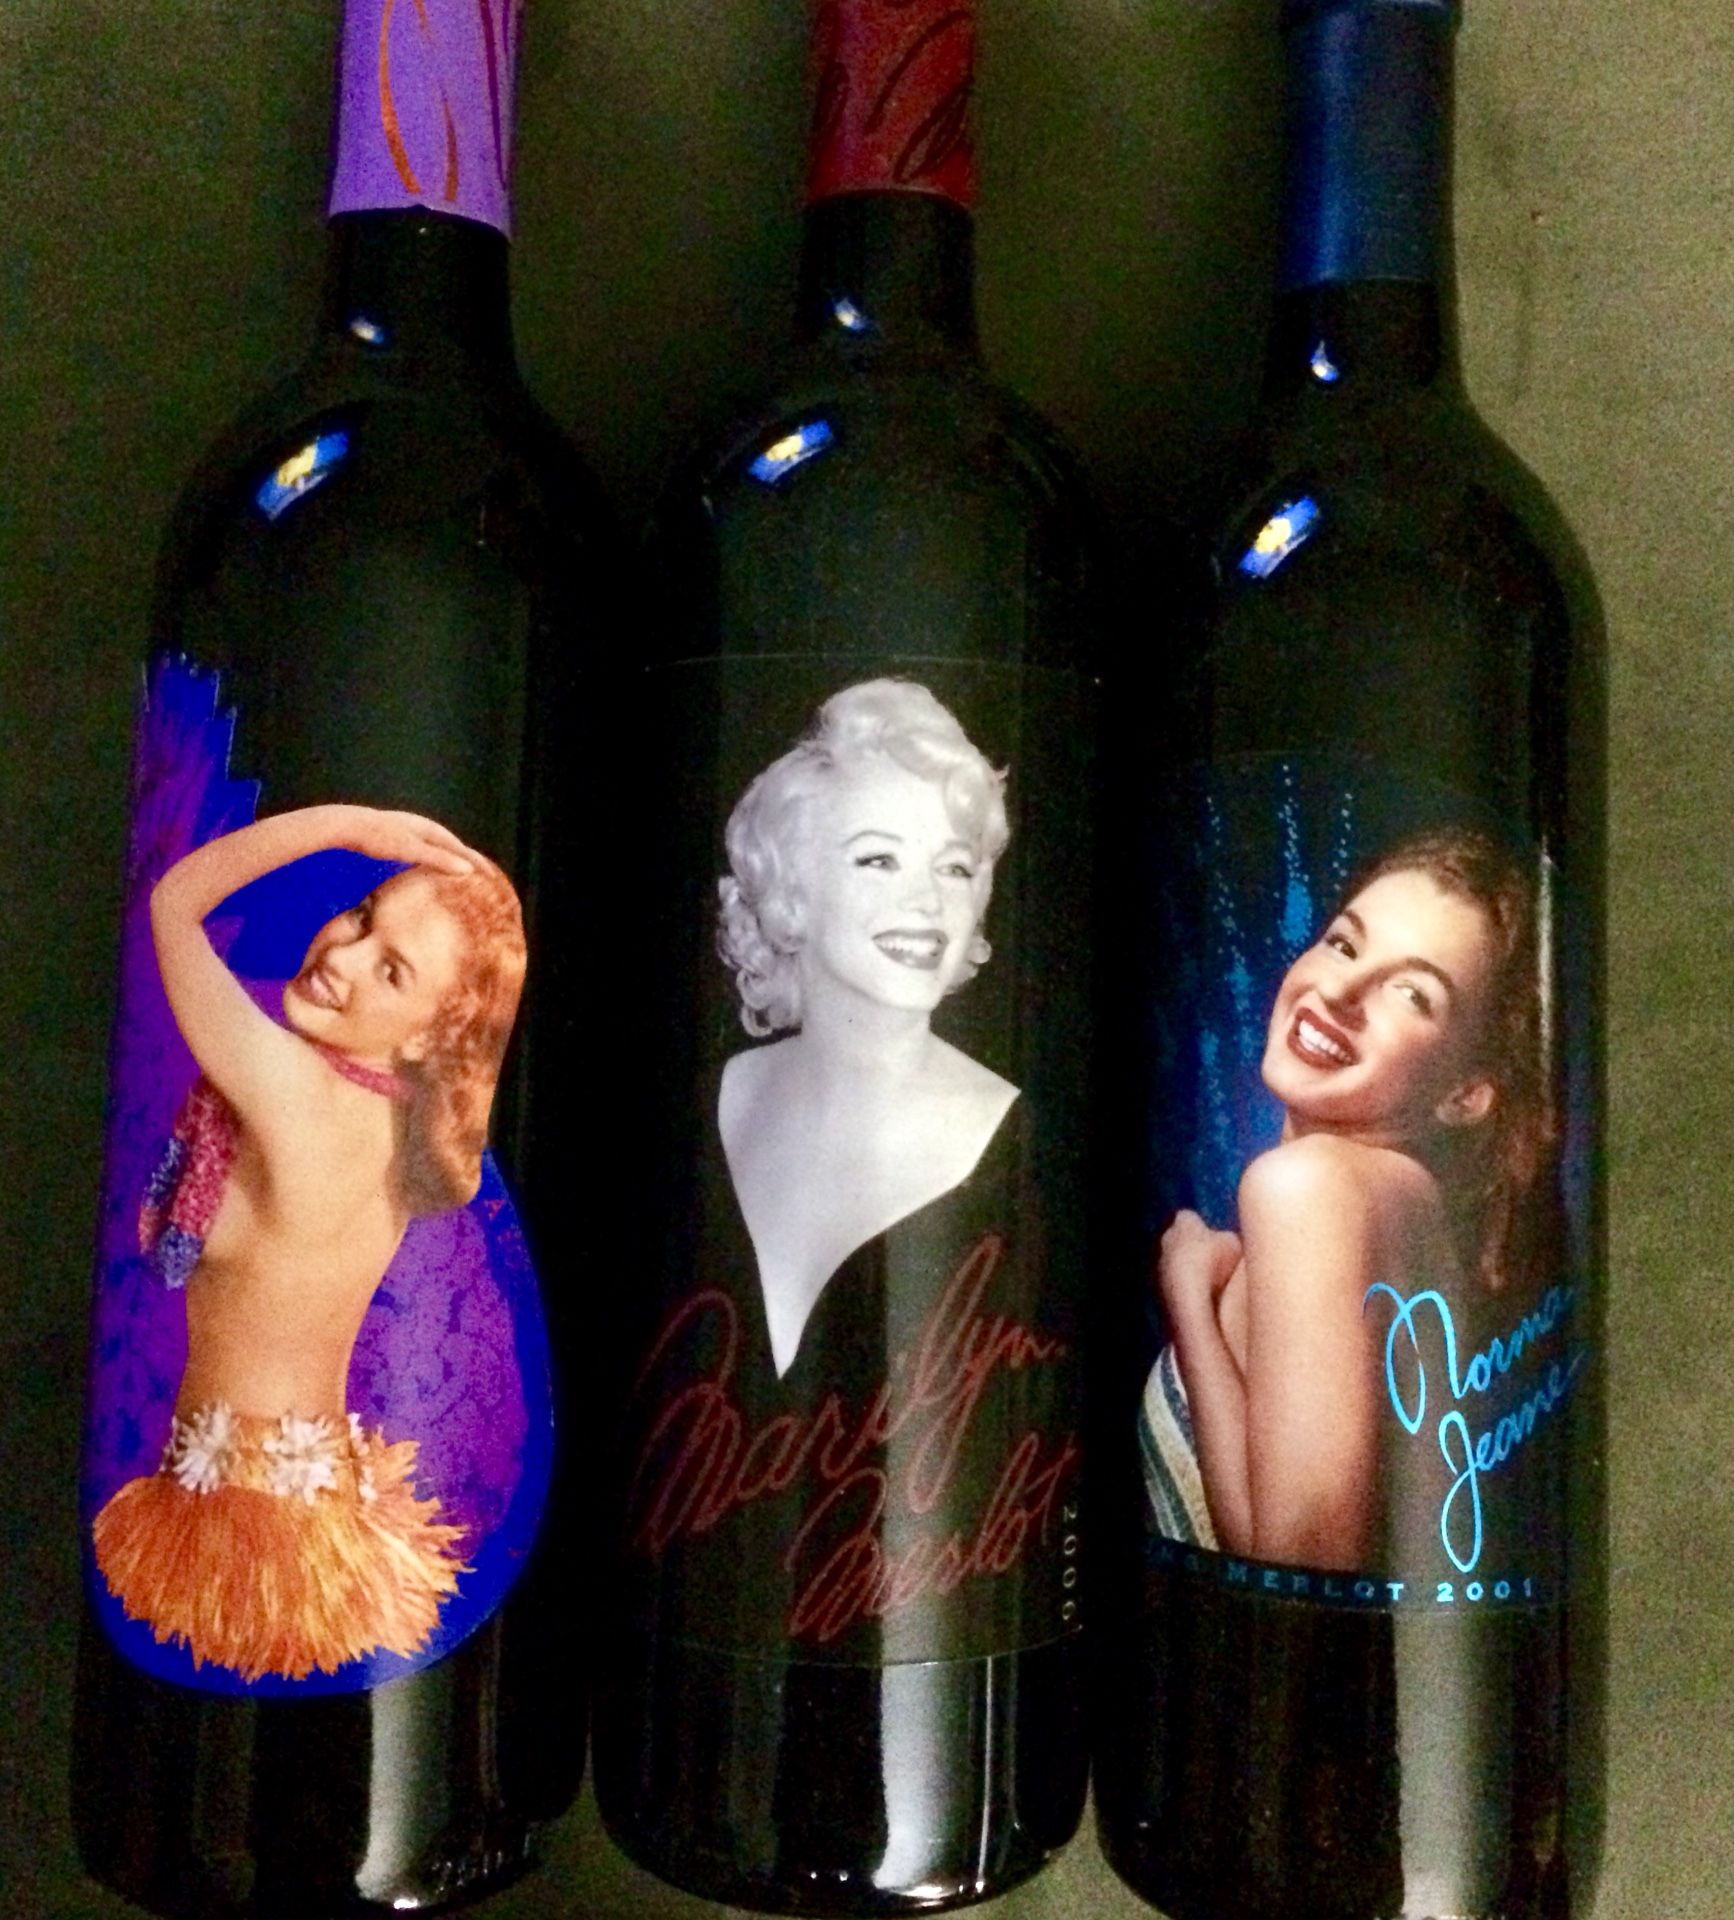 Marilyn and Norma Jeane bottles.